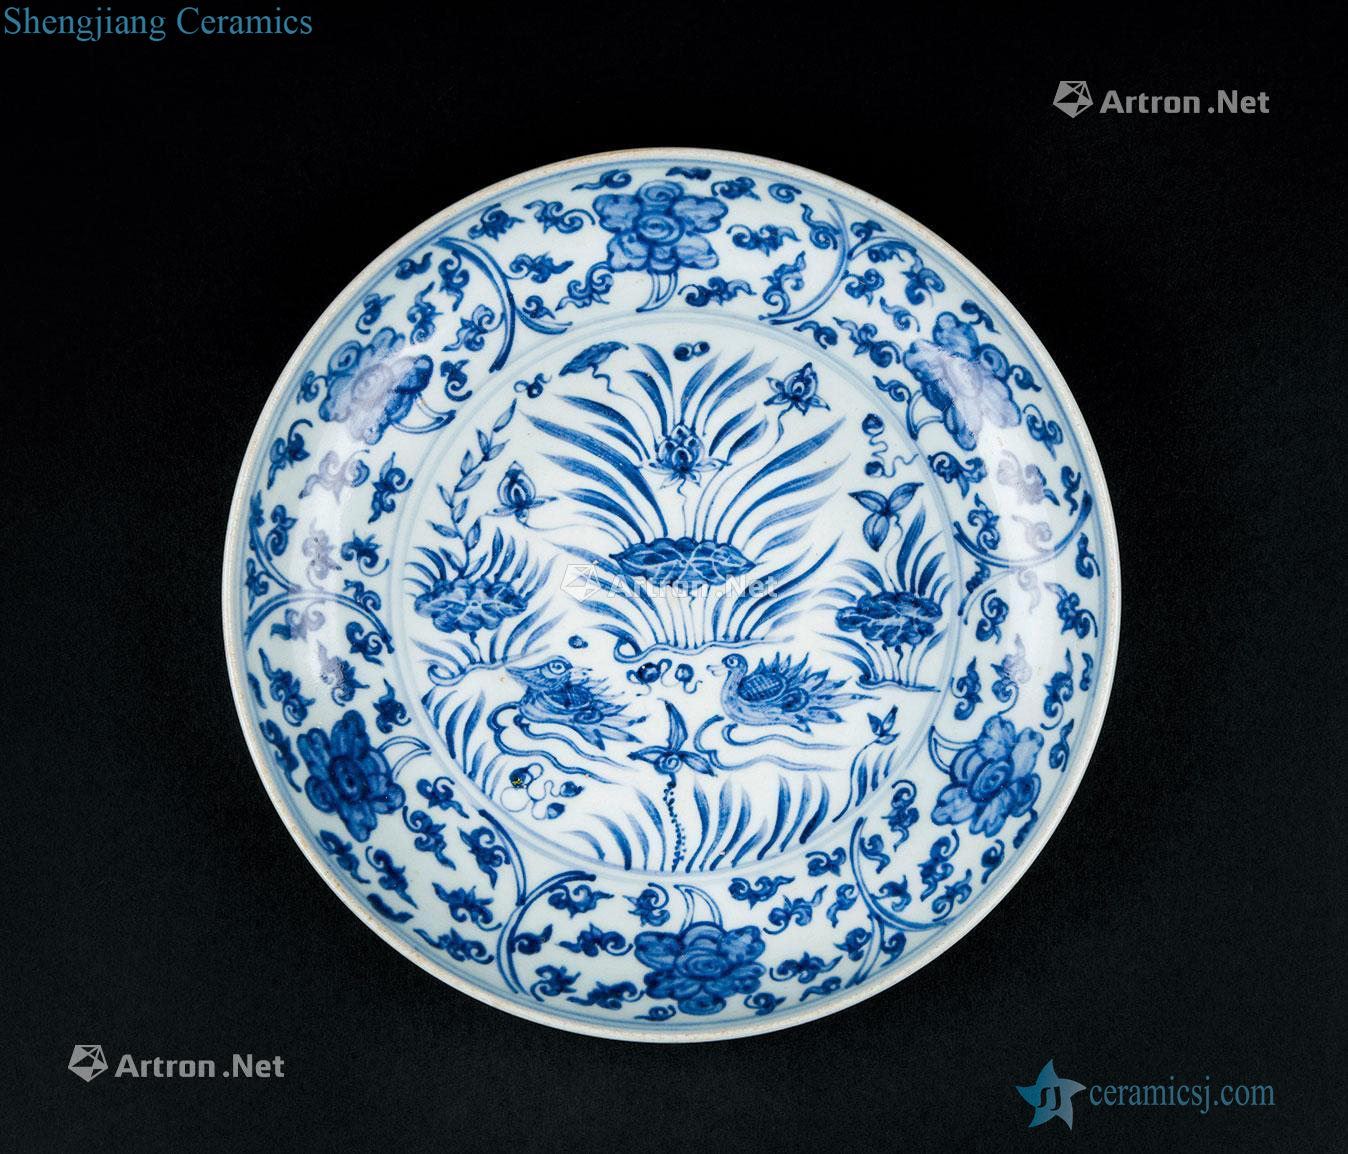 The Ming dynasty (1368-1644) blue and white yuanyang tray